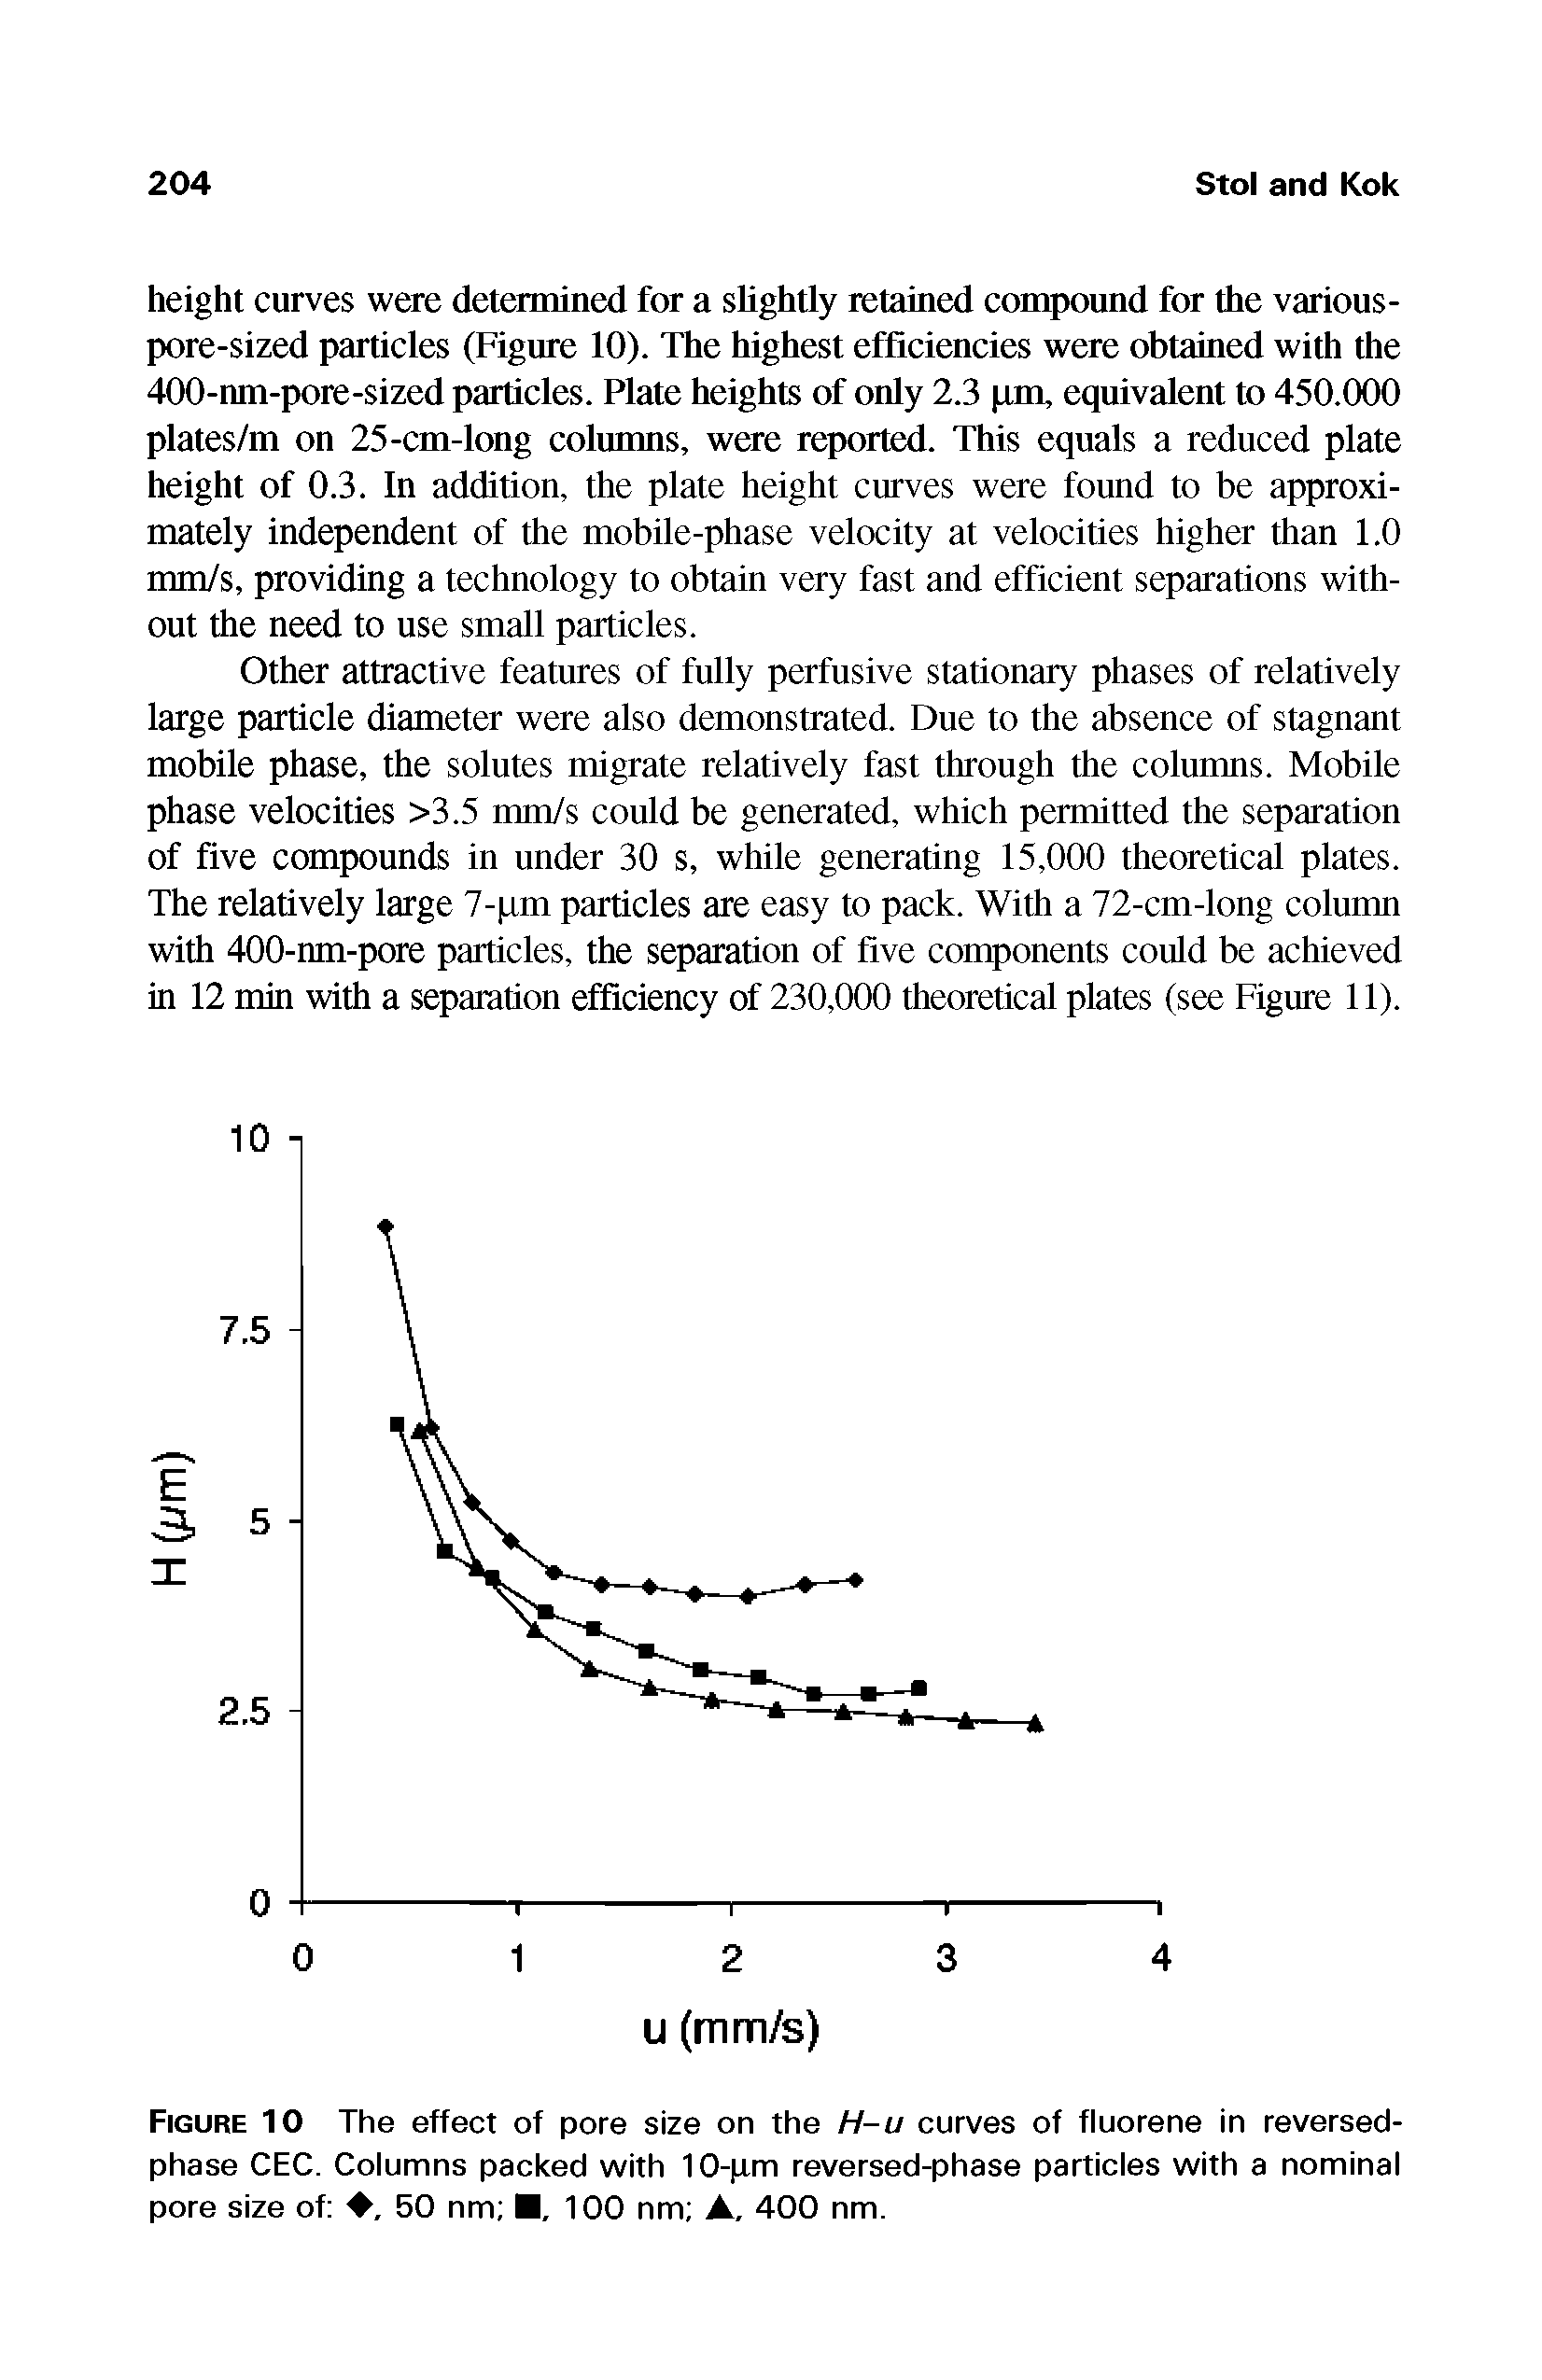 Figure 10 The effect of pore size on the H-u curves of fluorene in reversed-phase CEC. Columns packed with 10- xm reversed-phase particles with a nominal pore size of , 50 nm . 100 nm A, 400 nm.